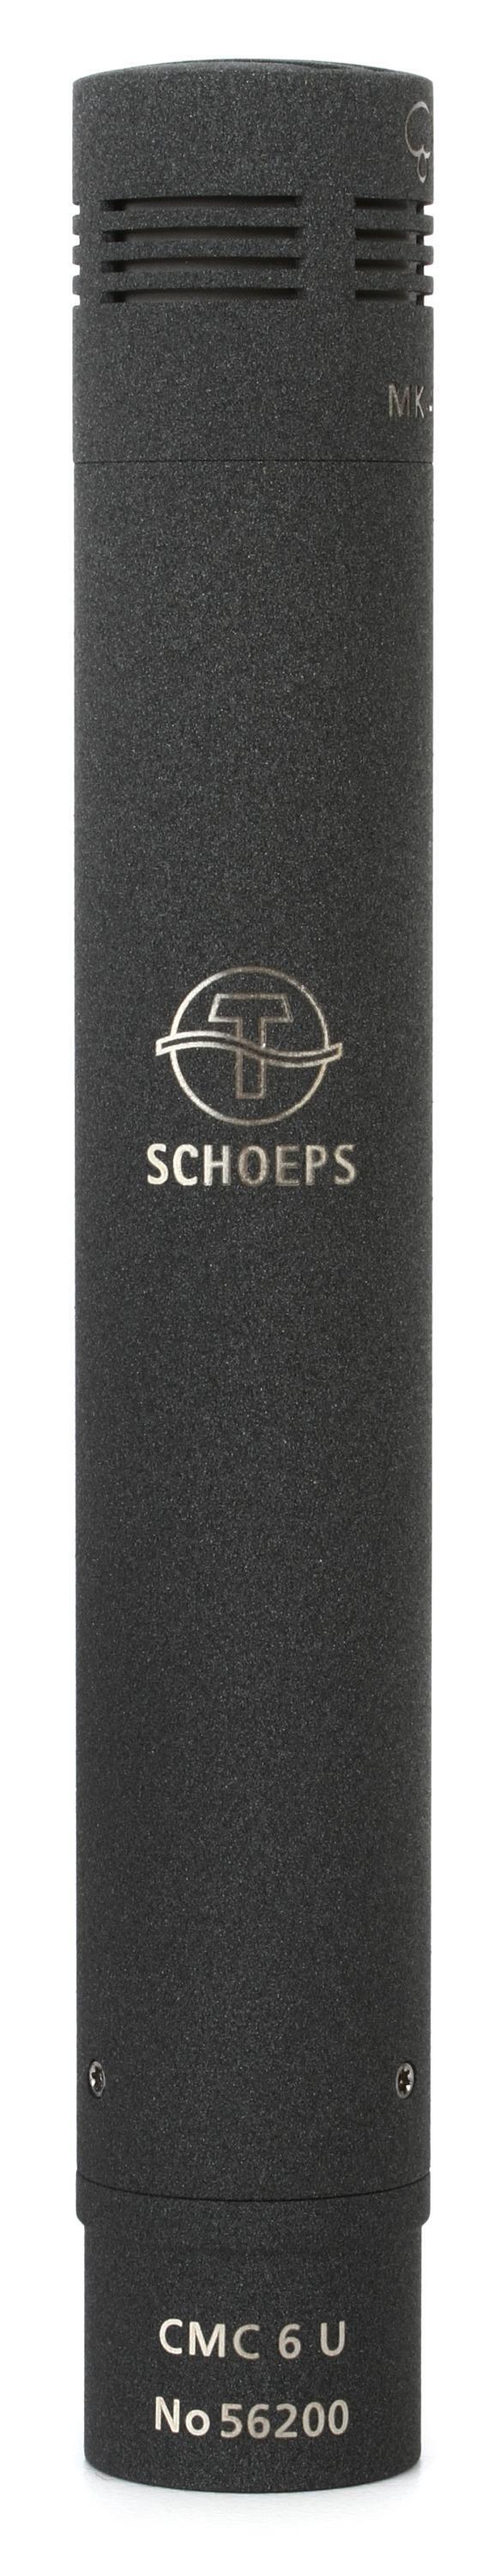 Schoeps Microphone Amplifier CMC 5 | Sweetwater